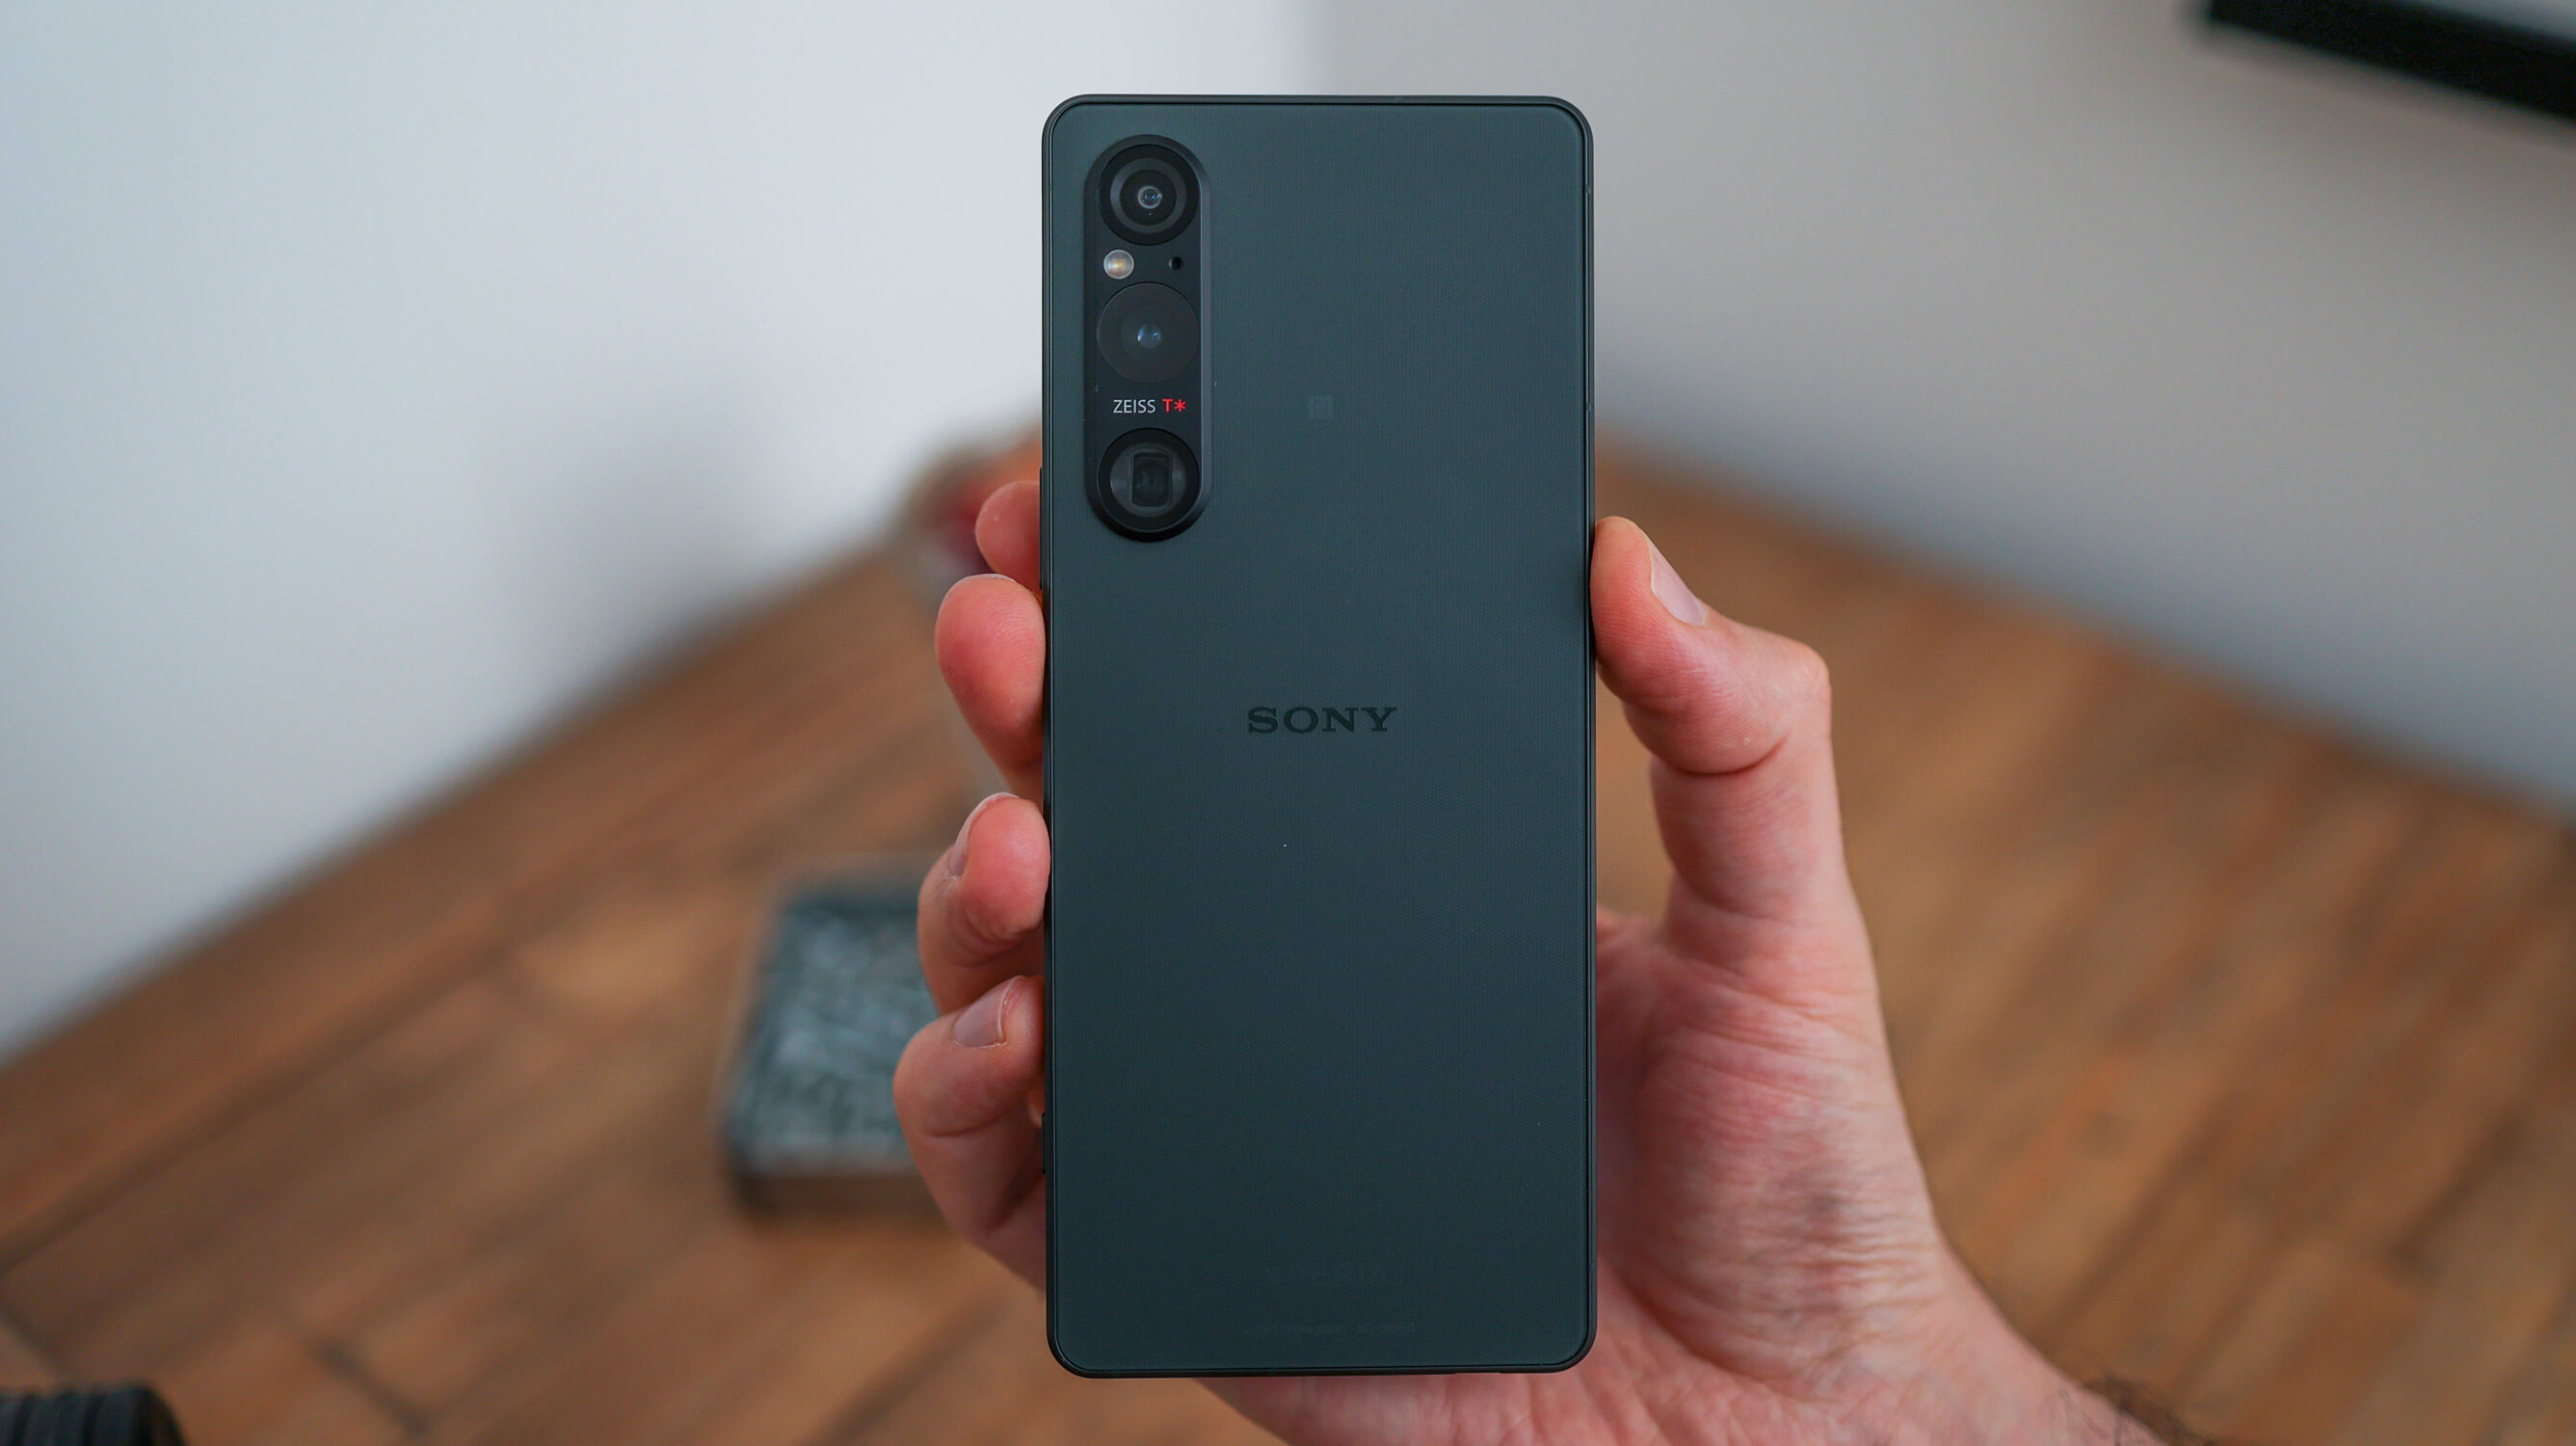 Troubleshooting Xperia Companion Installation Issues